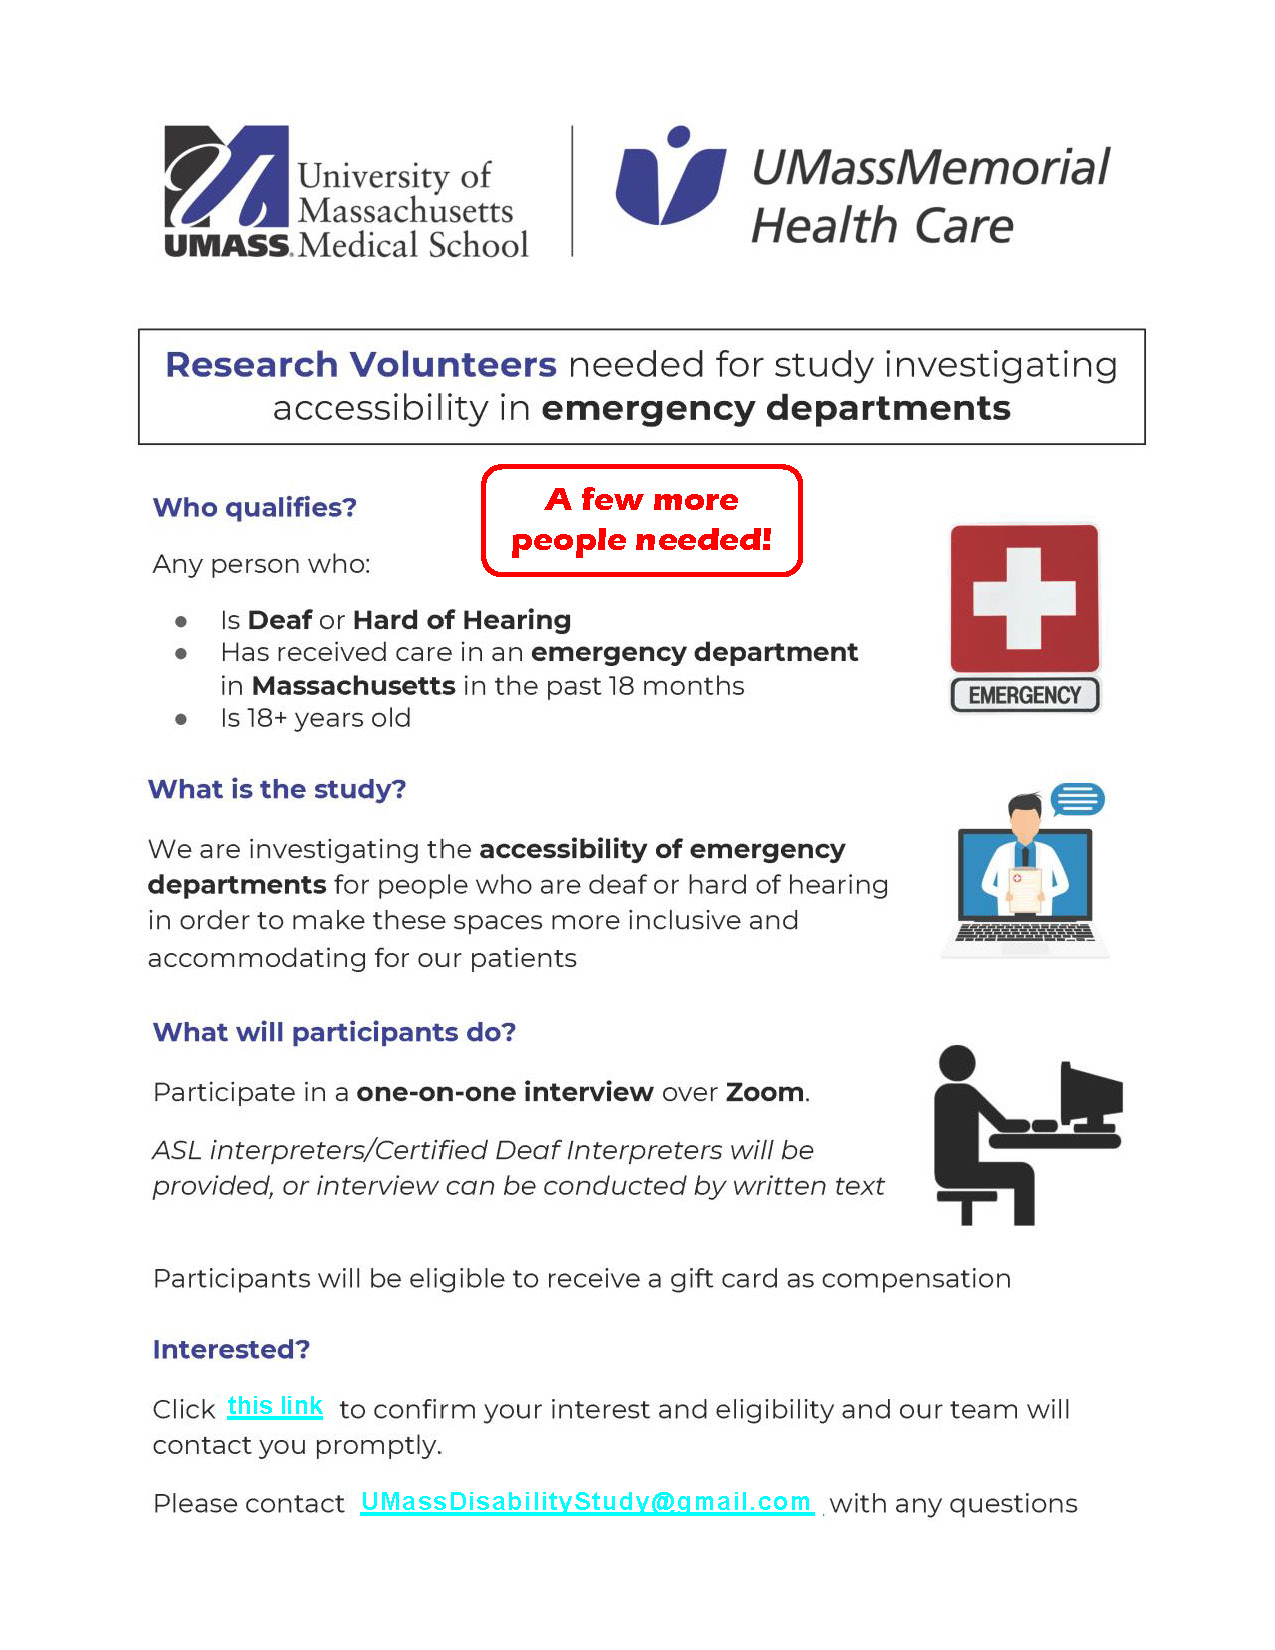 UMass Accessibility of Emergency Departments Research Study